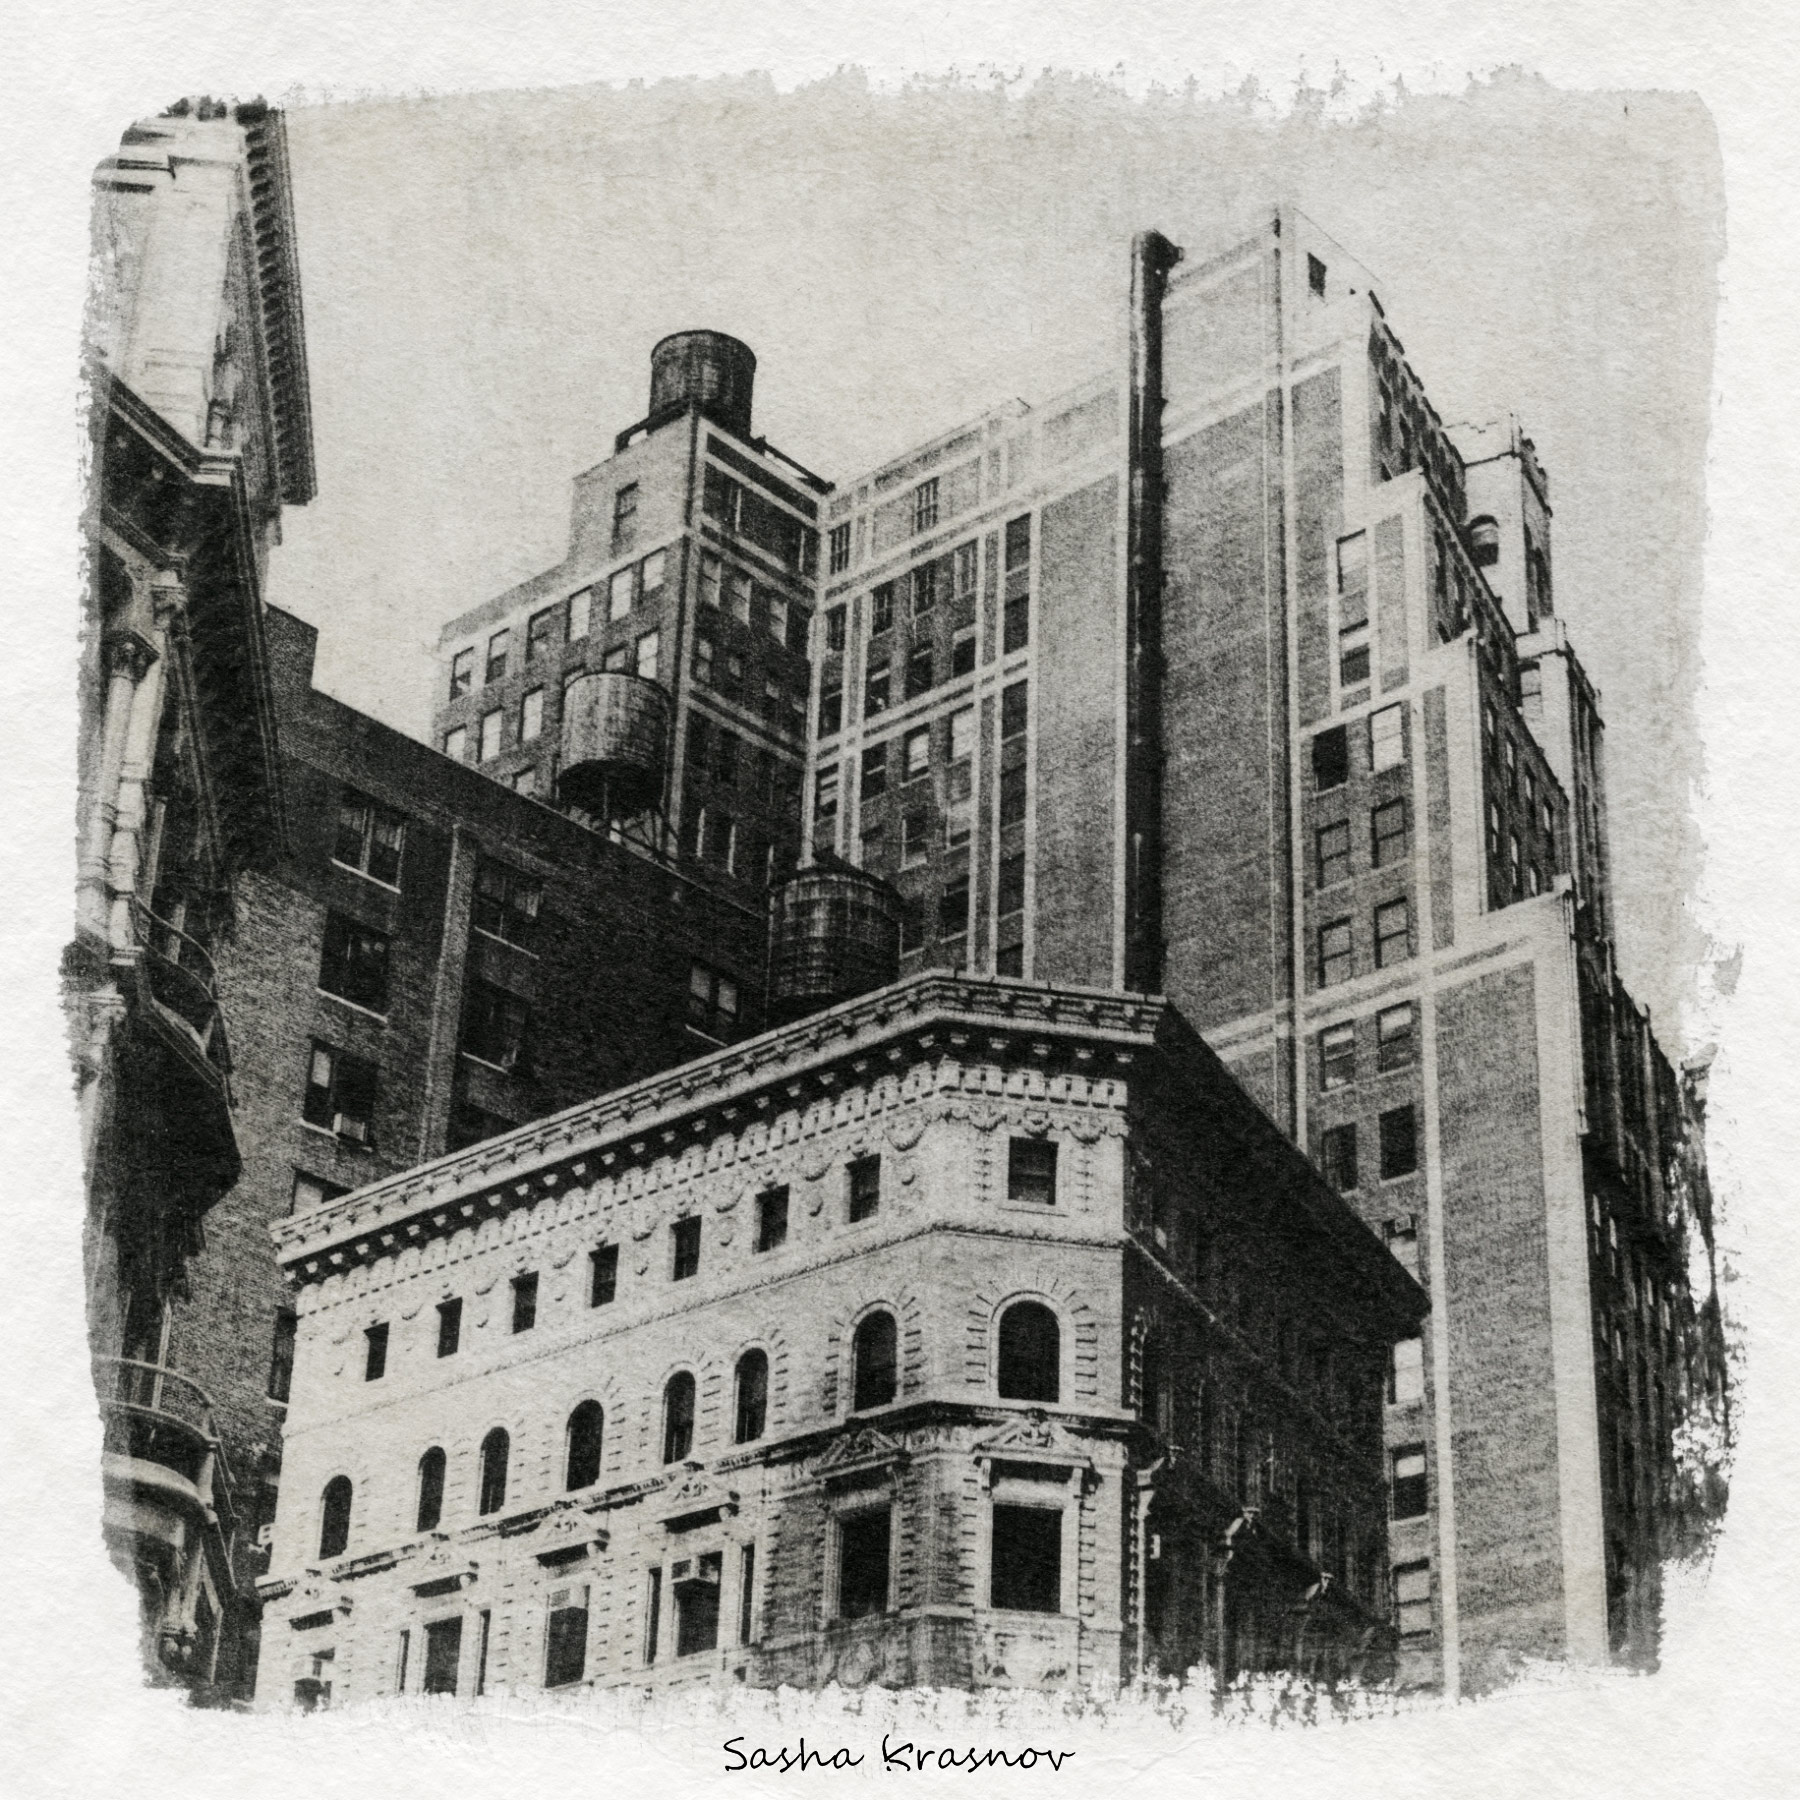 Street photography prints with liquid photo emulsion on watercolor paper